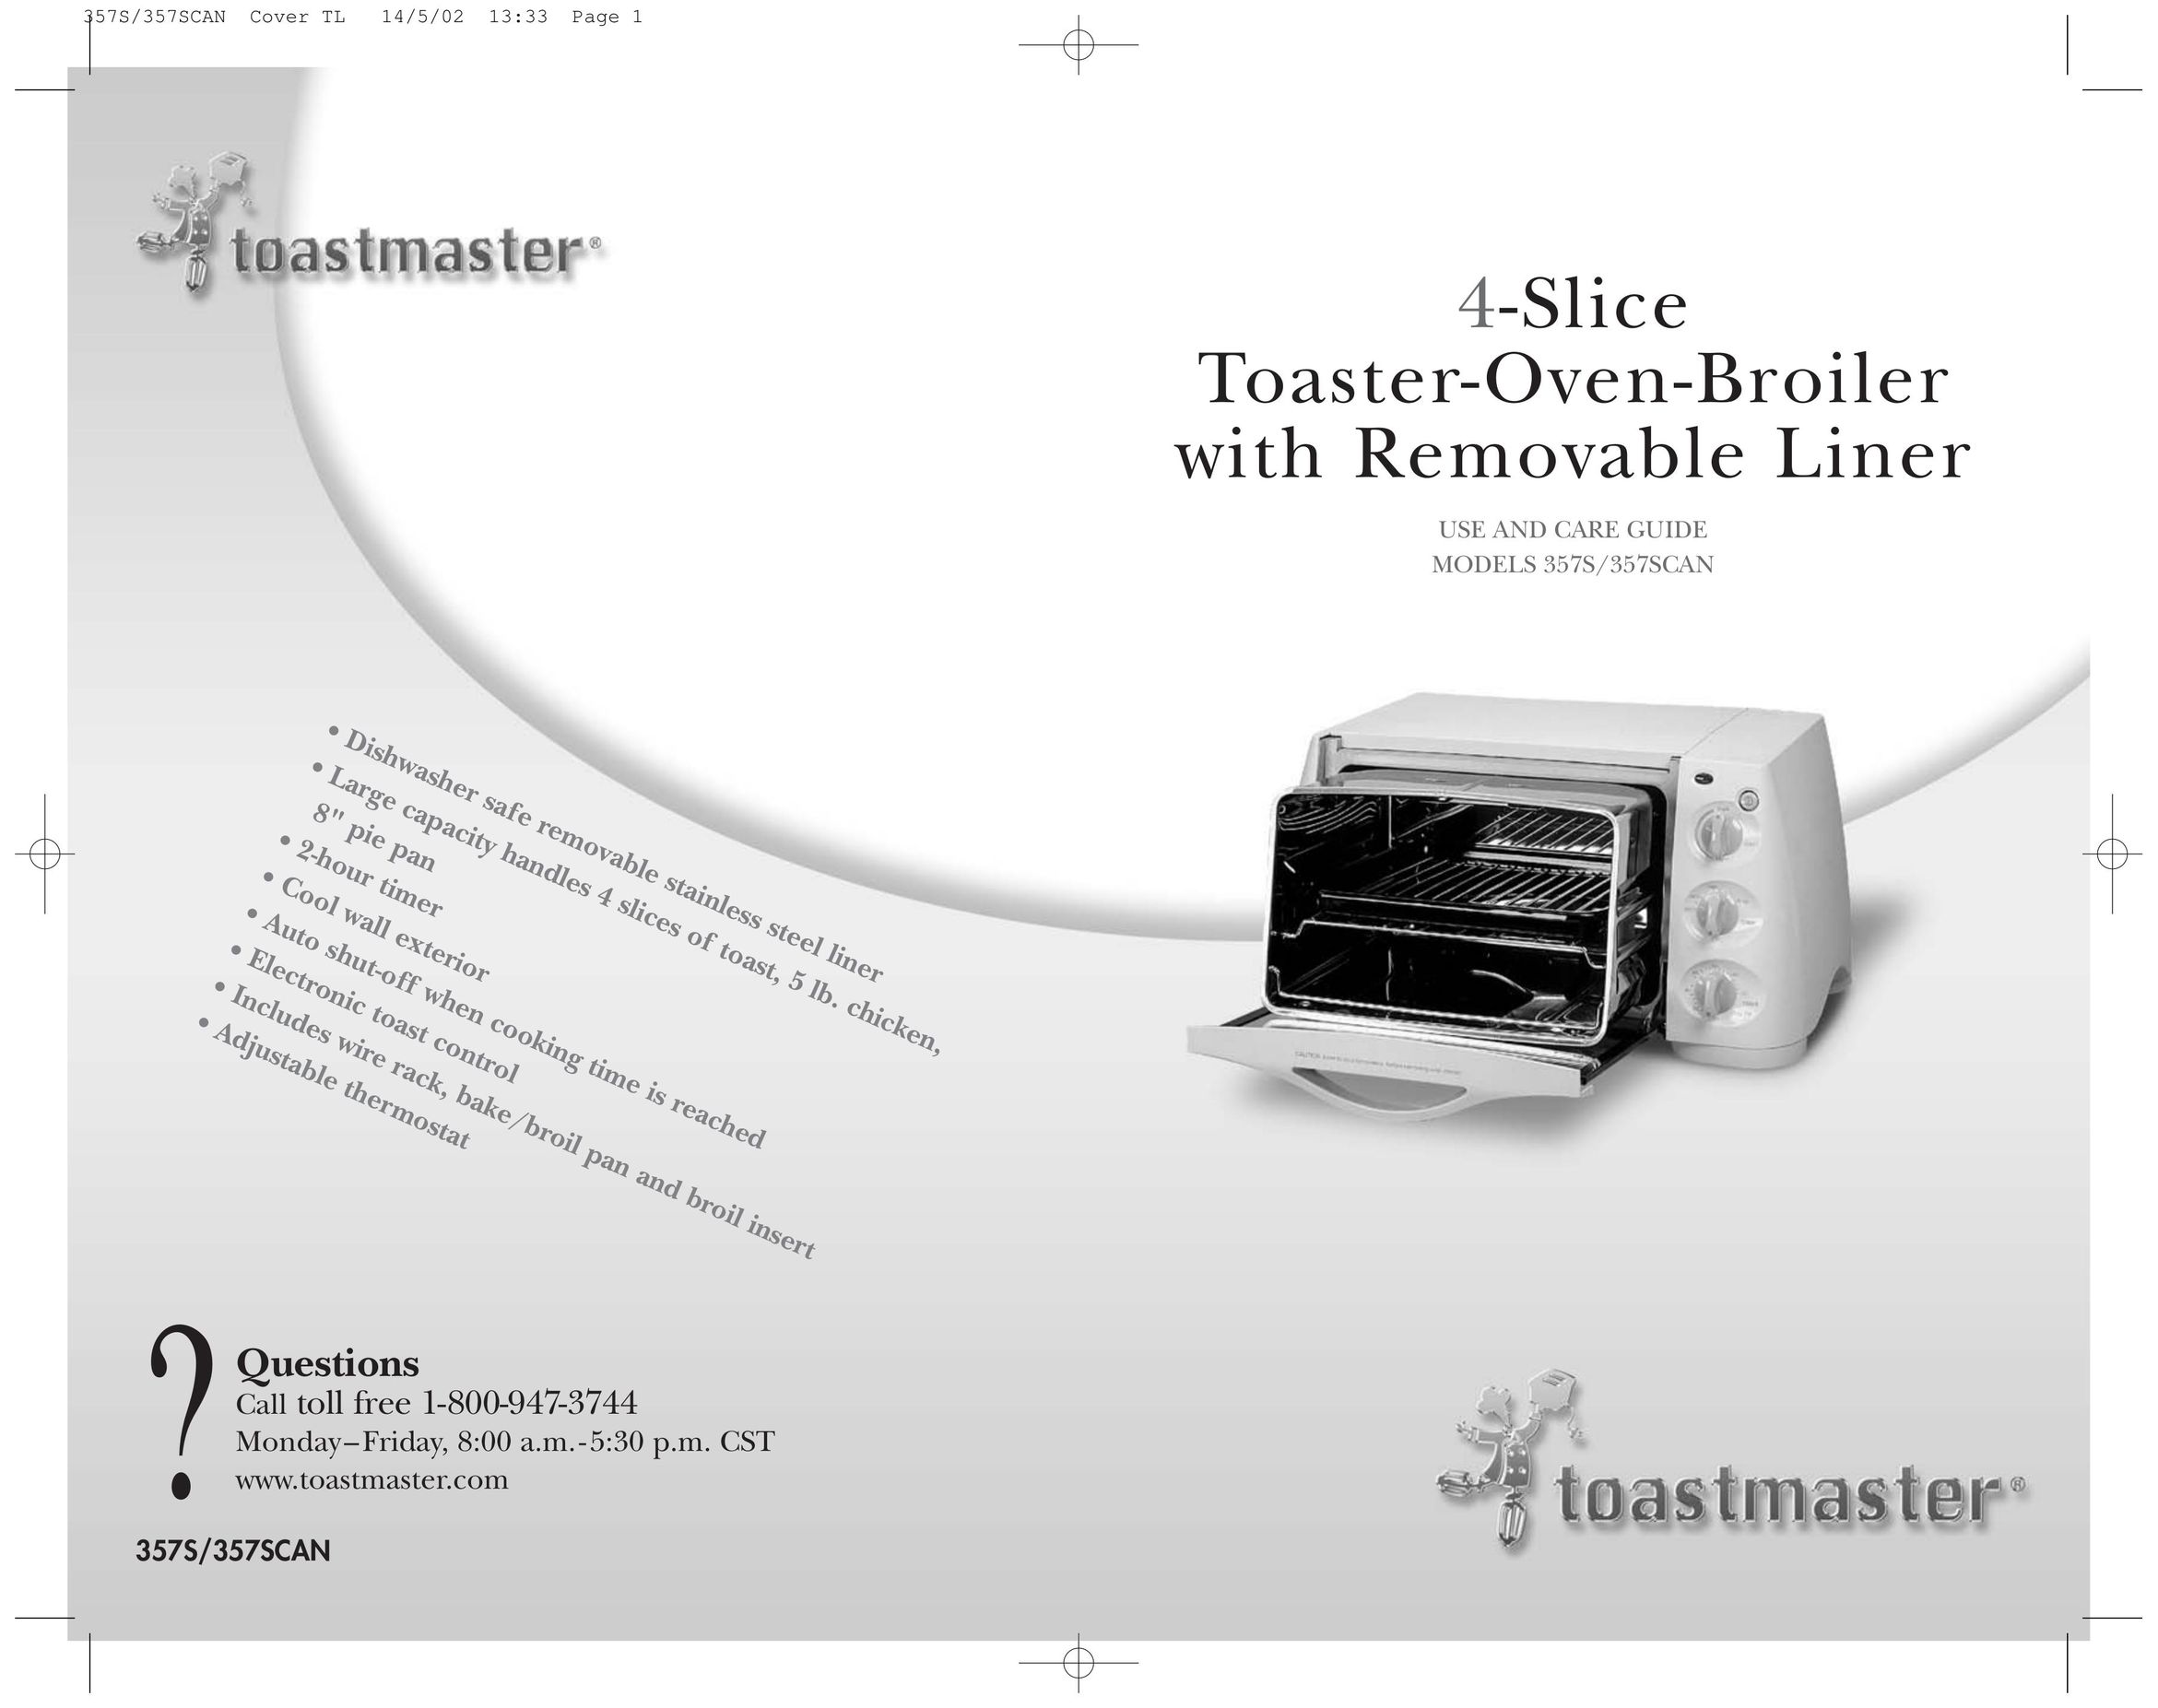 Toastmaster 357S Oven User Manual